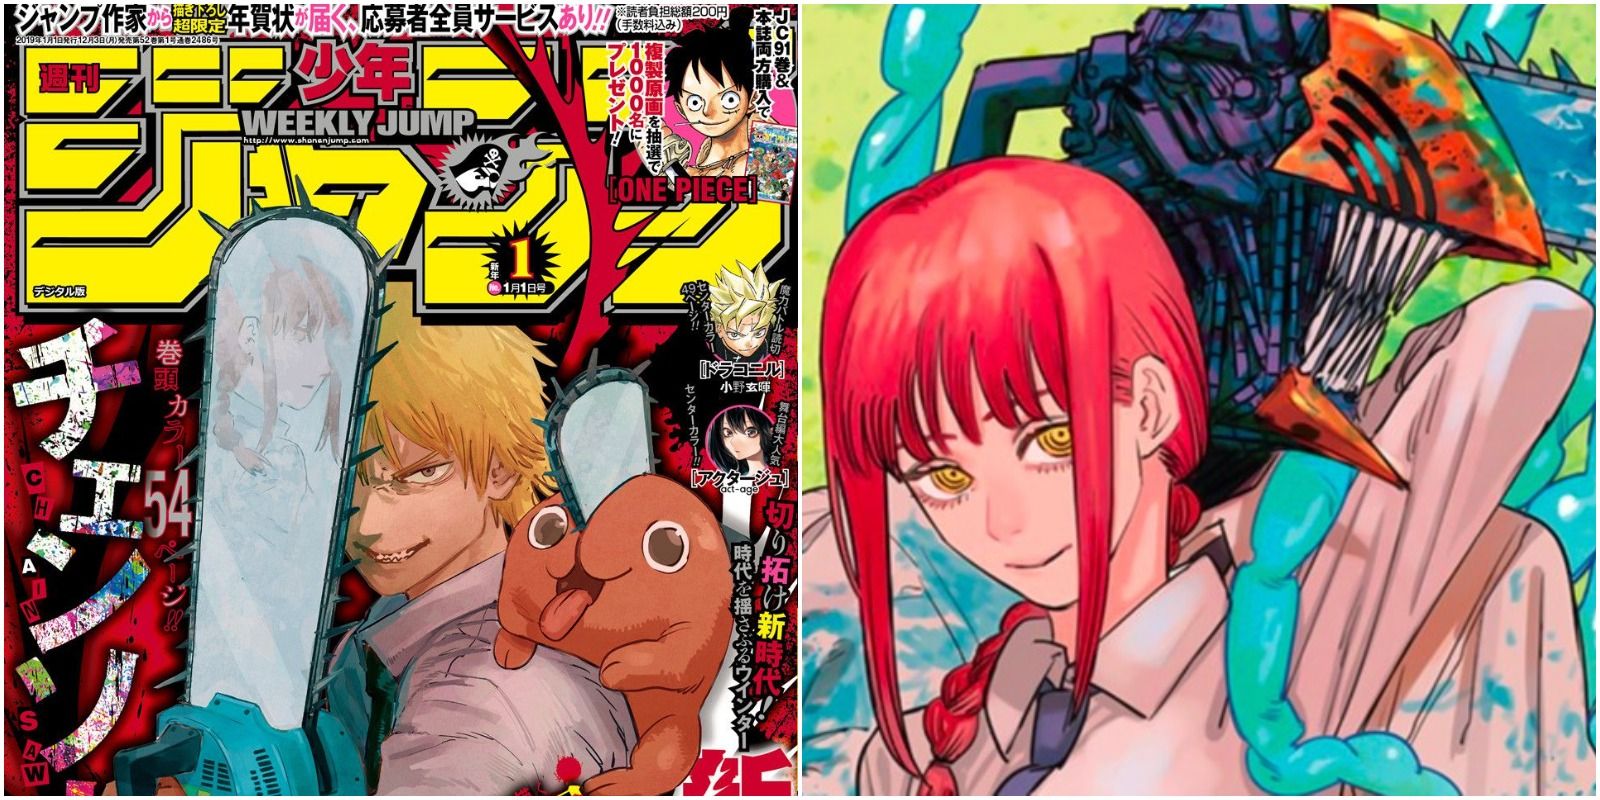 Denji and Pochita on the cover of Weekly Shonen Jump, and art for Chainsaw Man chapter 71